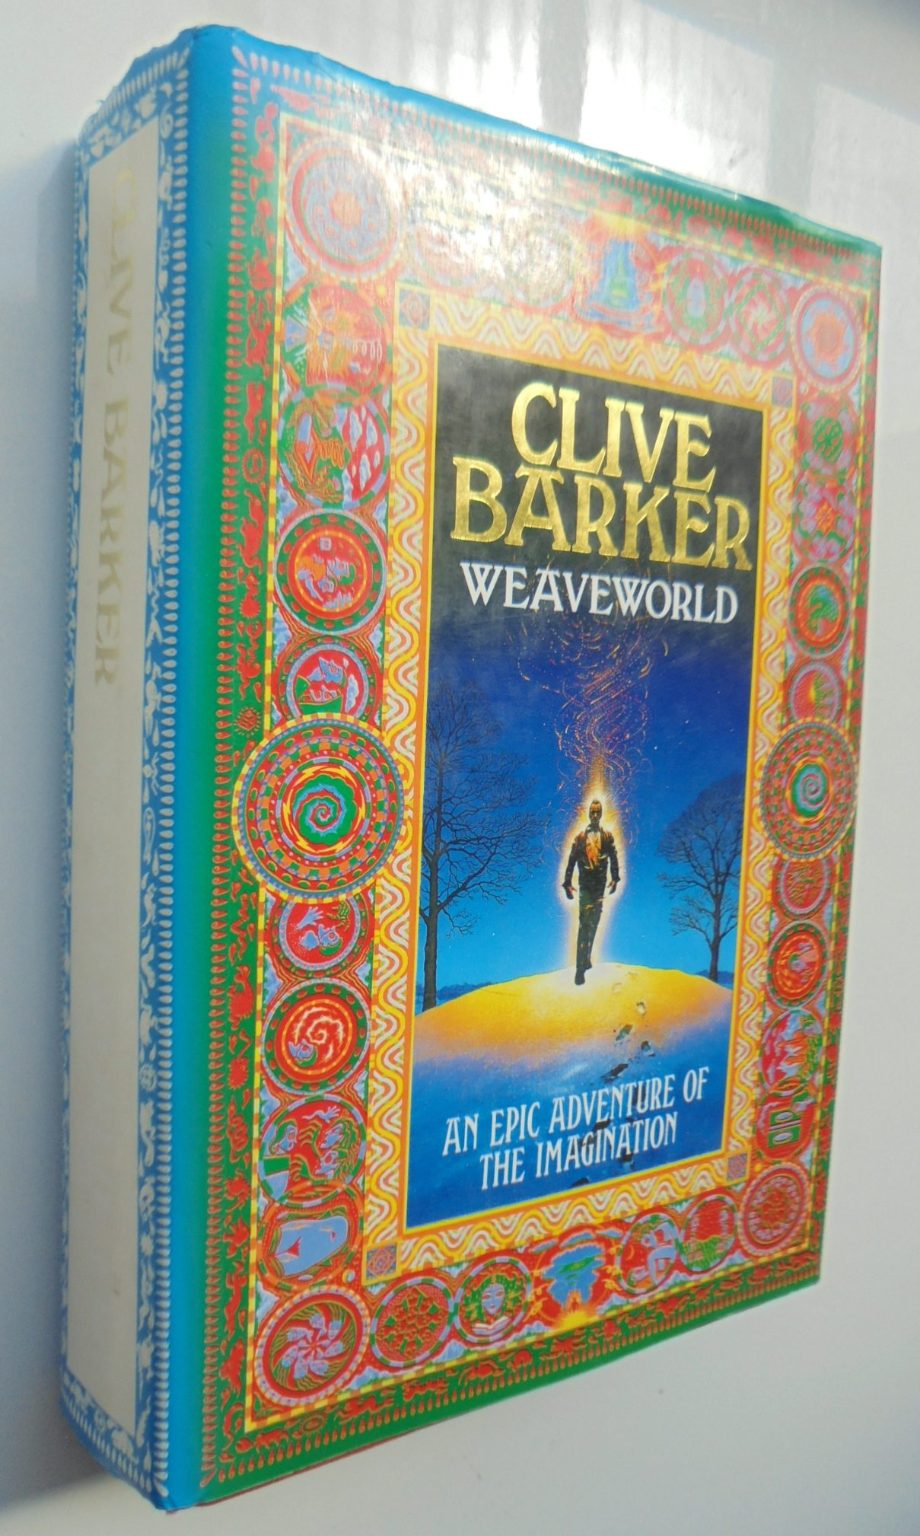 Weaveworld. First Edition. By Clive Barker